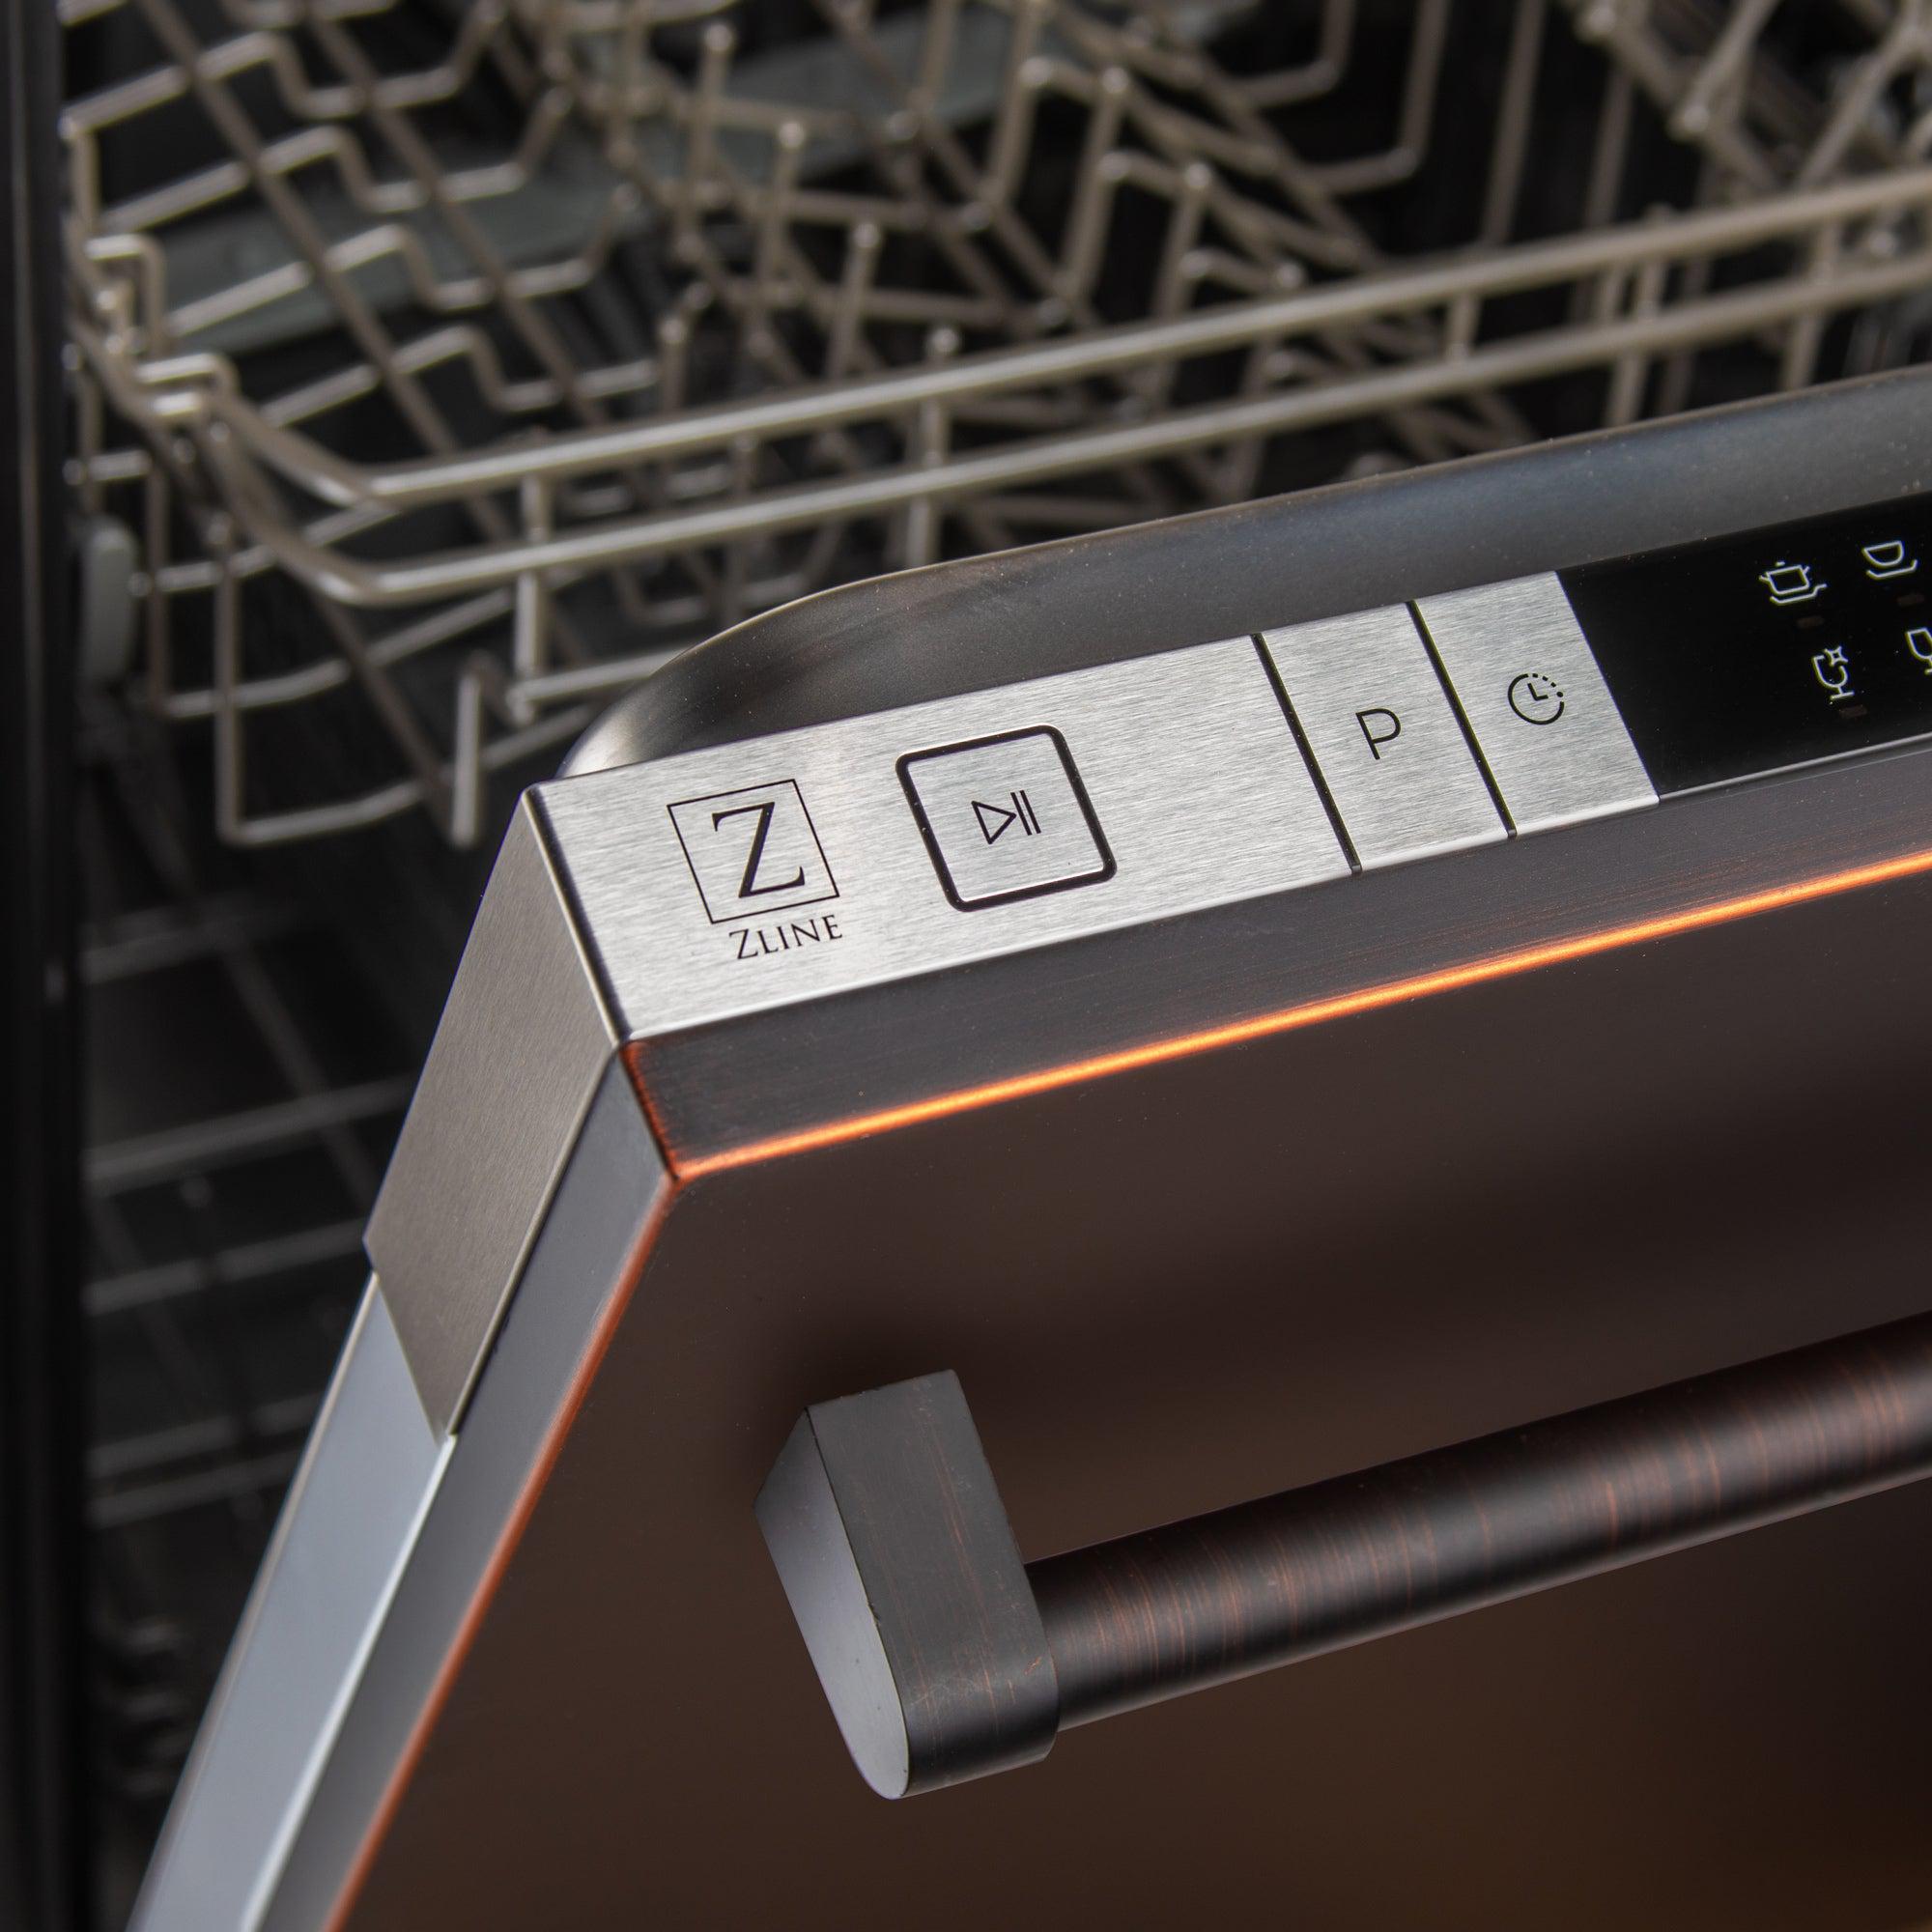 ZLINE 18 in. Compact Oil-Rubbed Bronze Top Control Built-In Dishwasher with Stainless Steel Tub and Traditional Style Handle, 52dBa